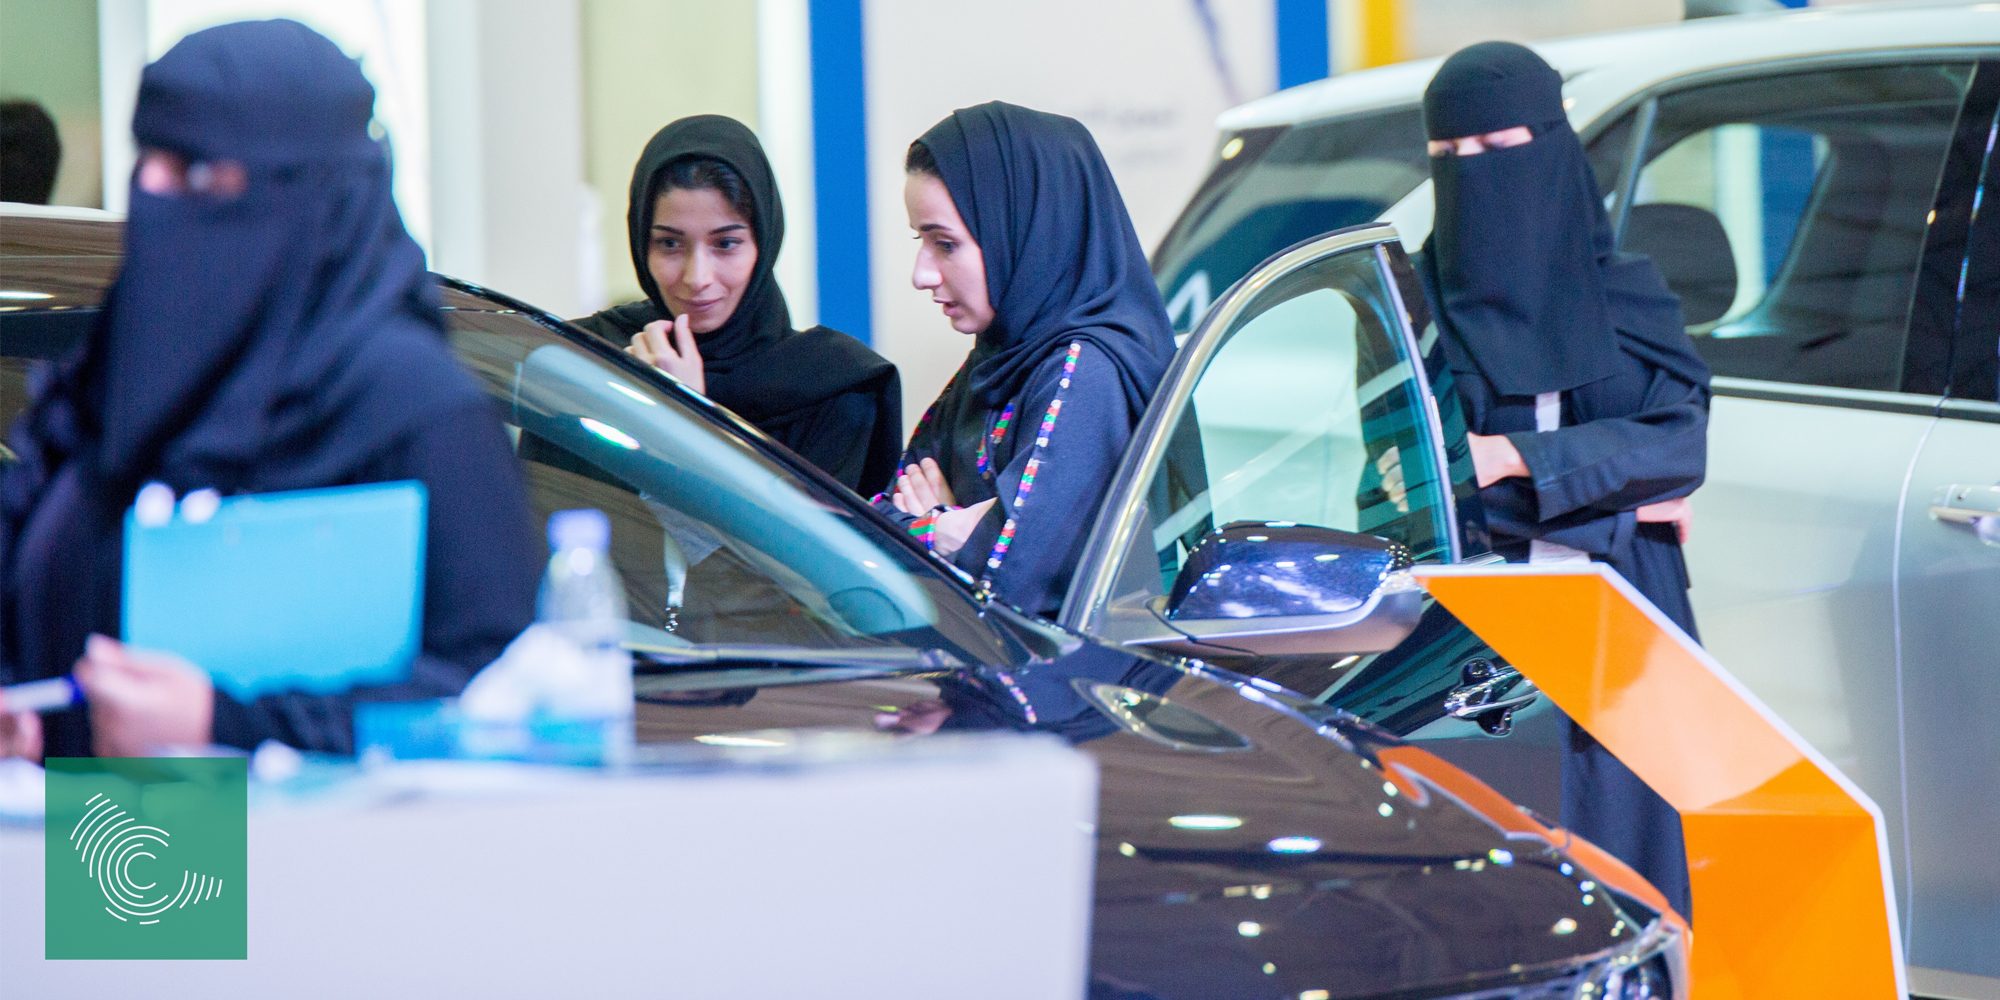 Car Accessories Exhibition Helps to Improve Safety Awareness Among Saudi Women